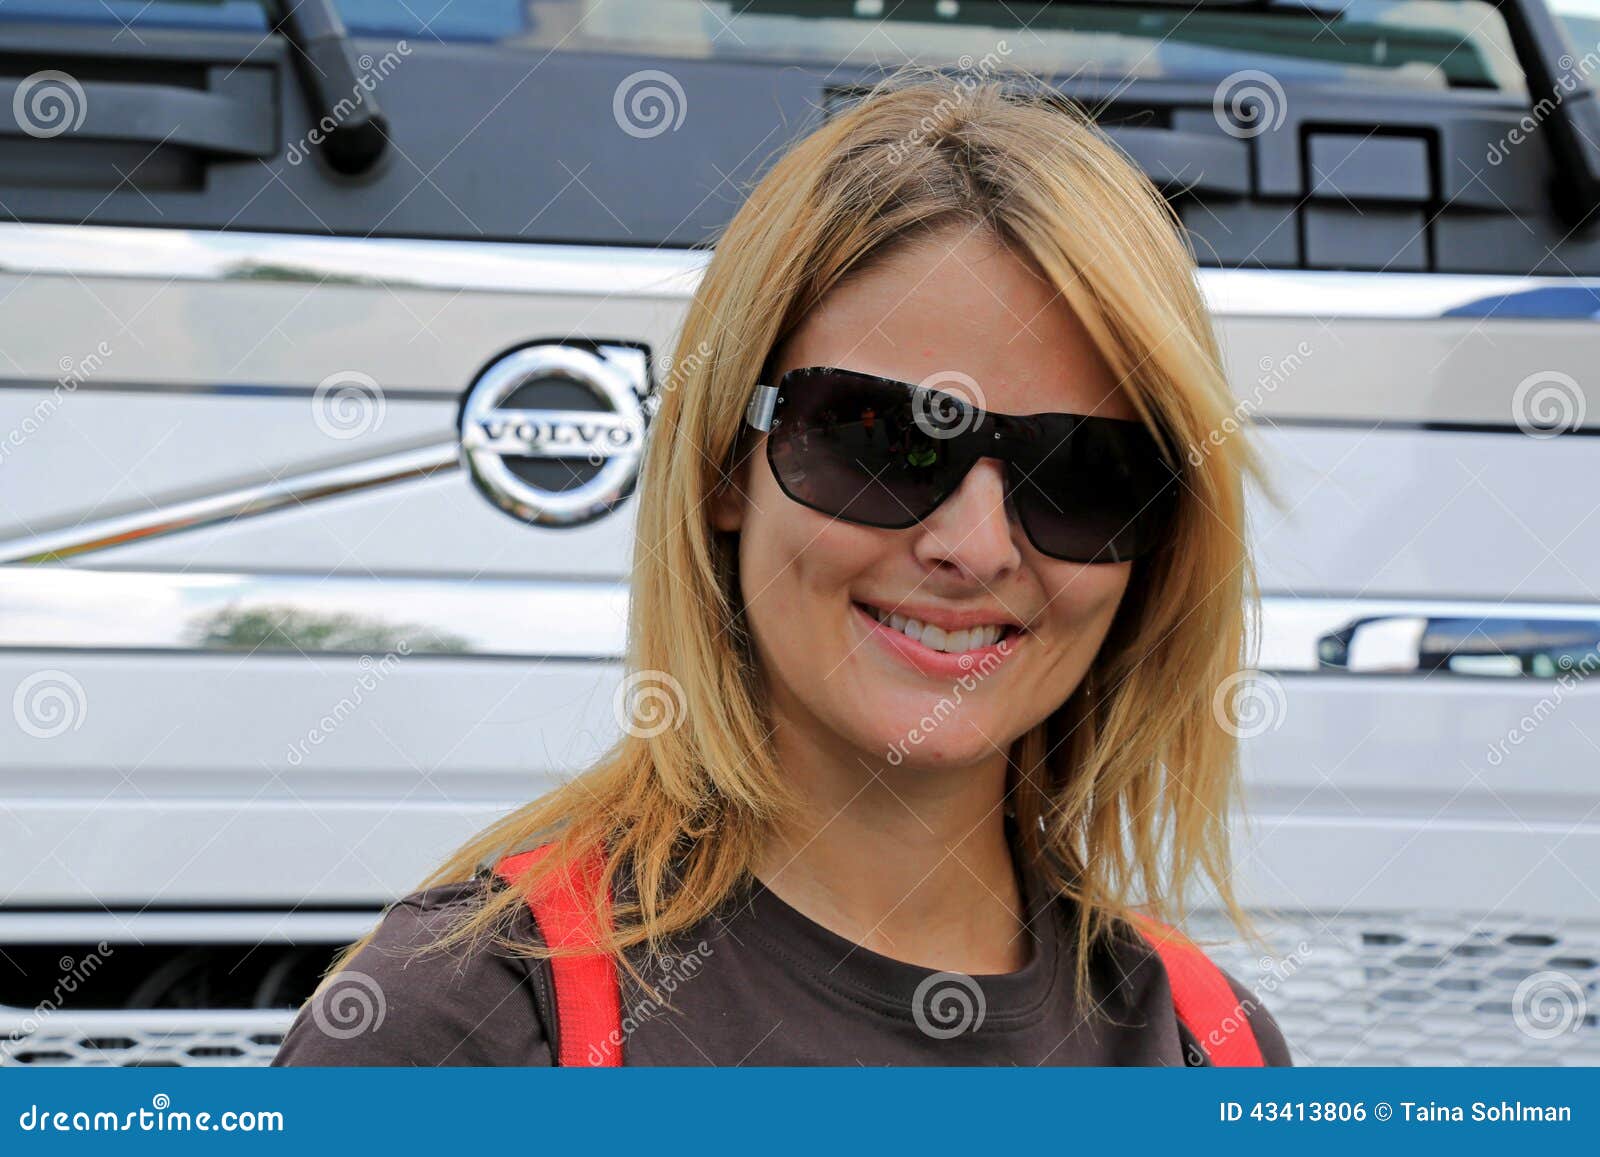 Lisa Kelly Greets Fans in Finland Royalty Free Stock Image - lisa-kelly-greets-fans-finland-lempaala-august-ice-road-trucker-tv-personality-stops-lempaala-to-greet-special-guest-43413806